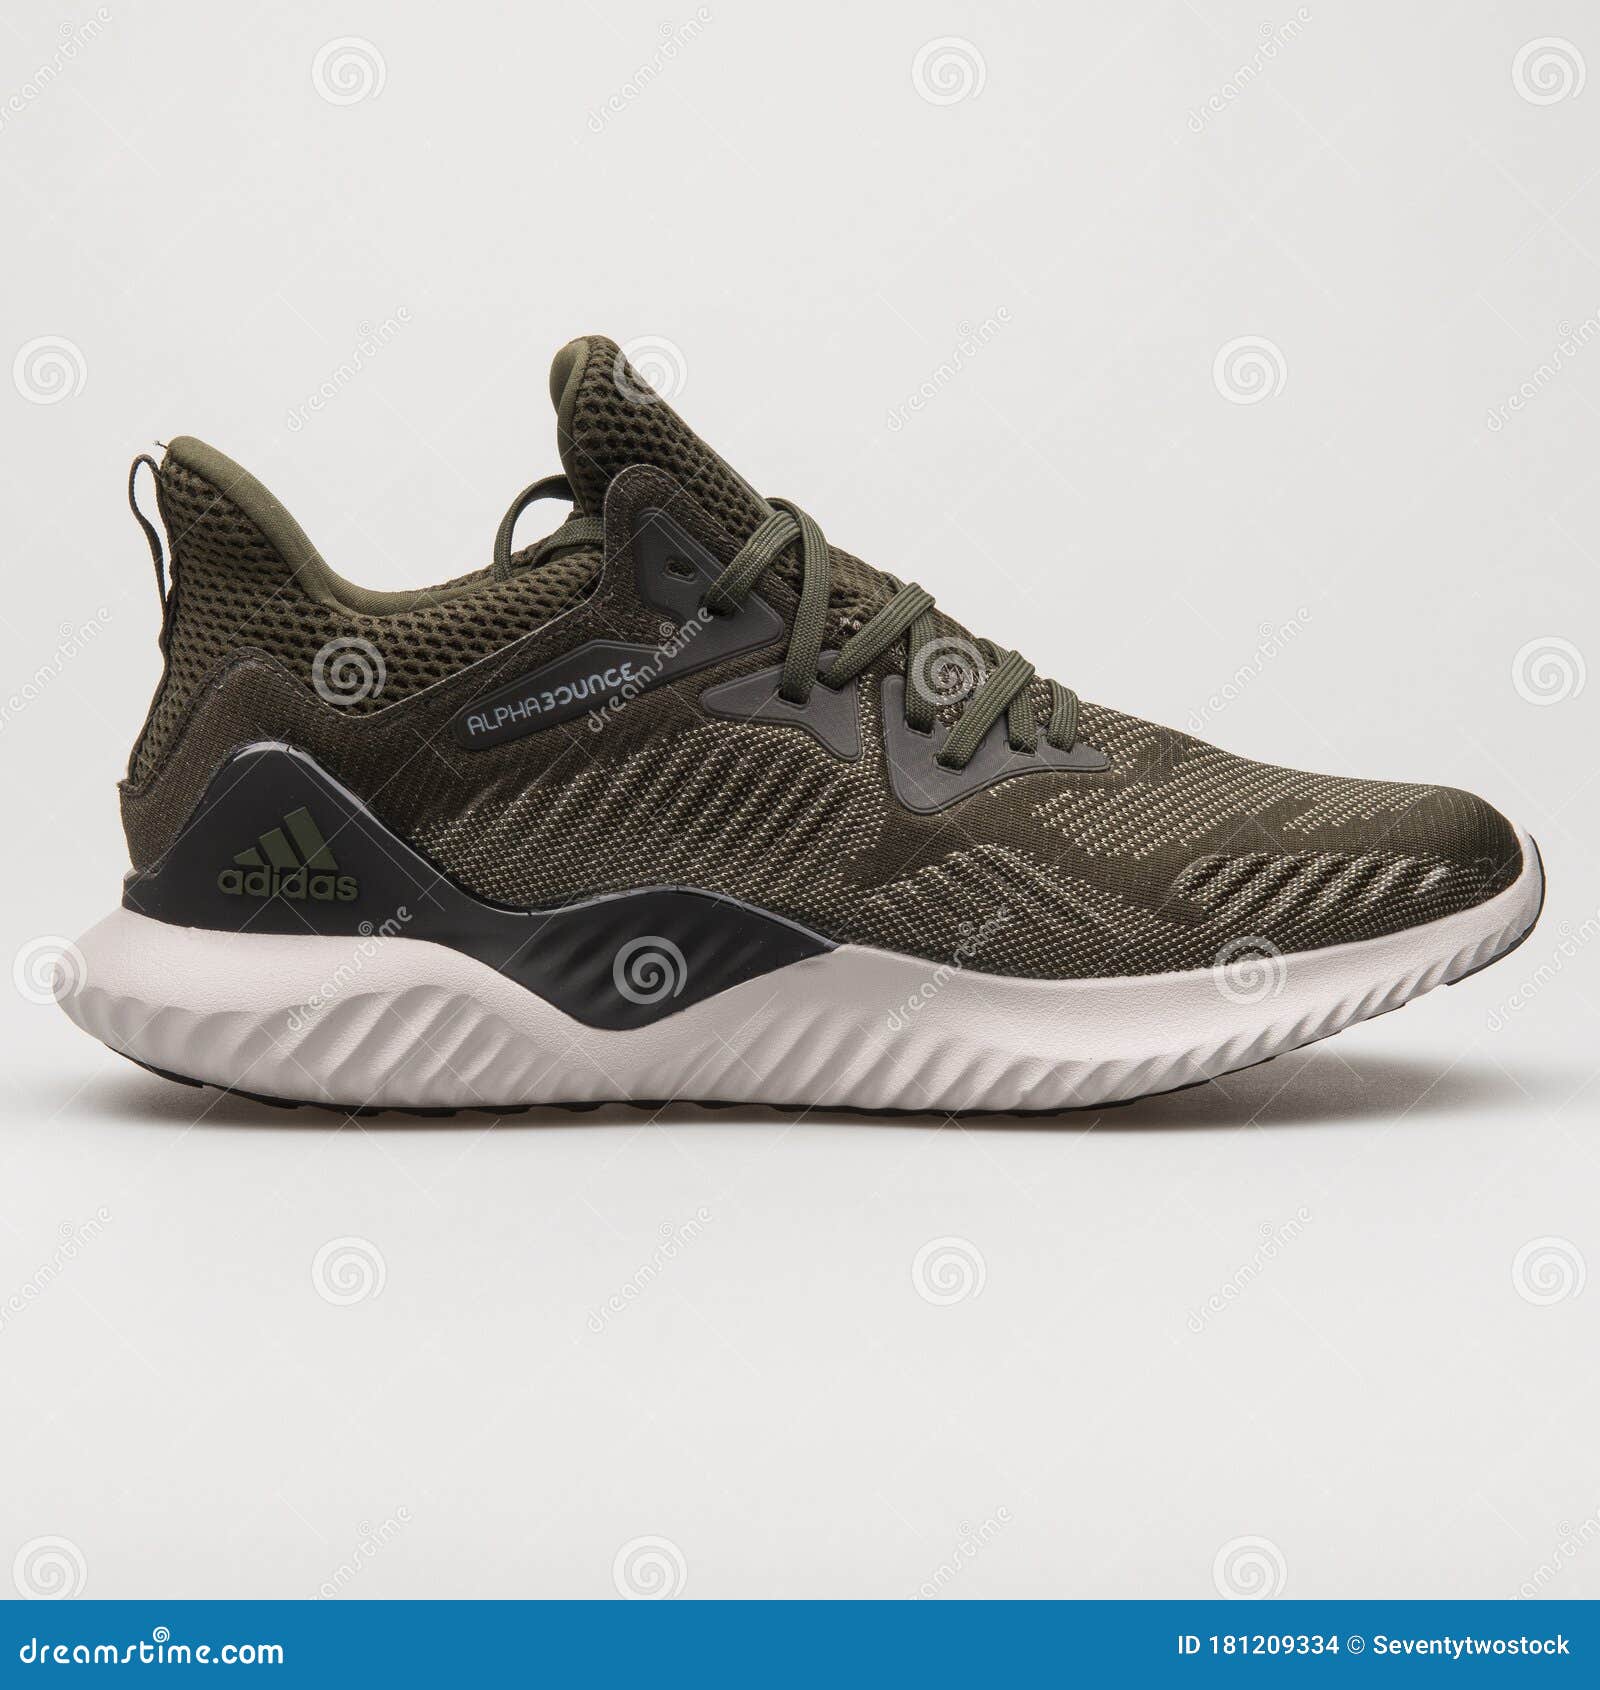 adidas alphabounce beyond olive green